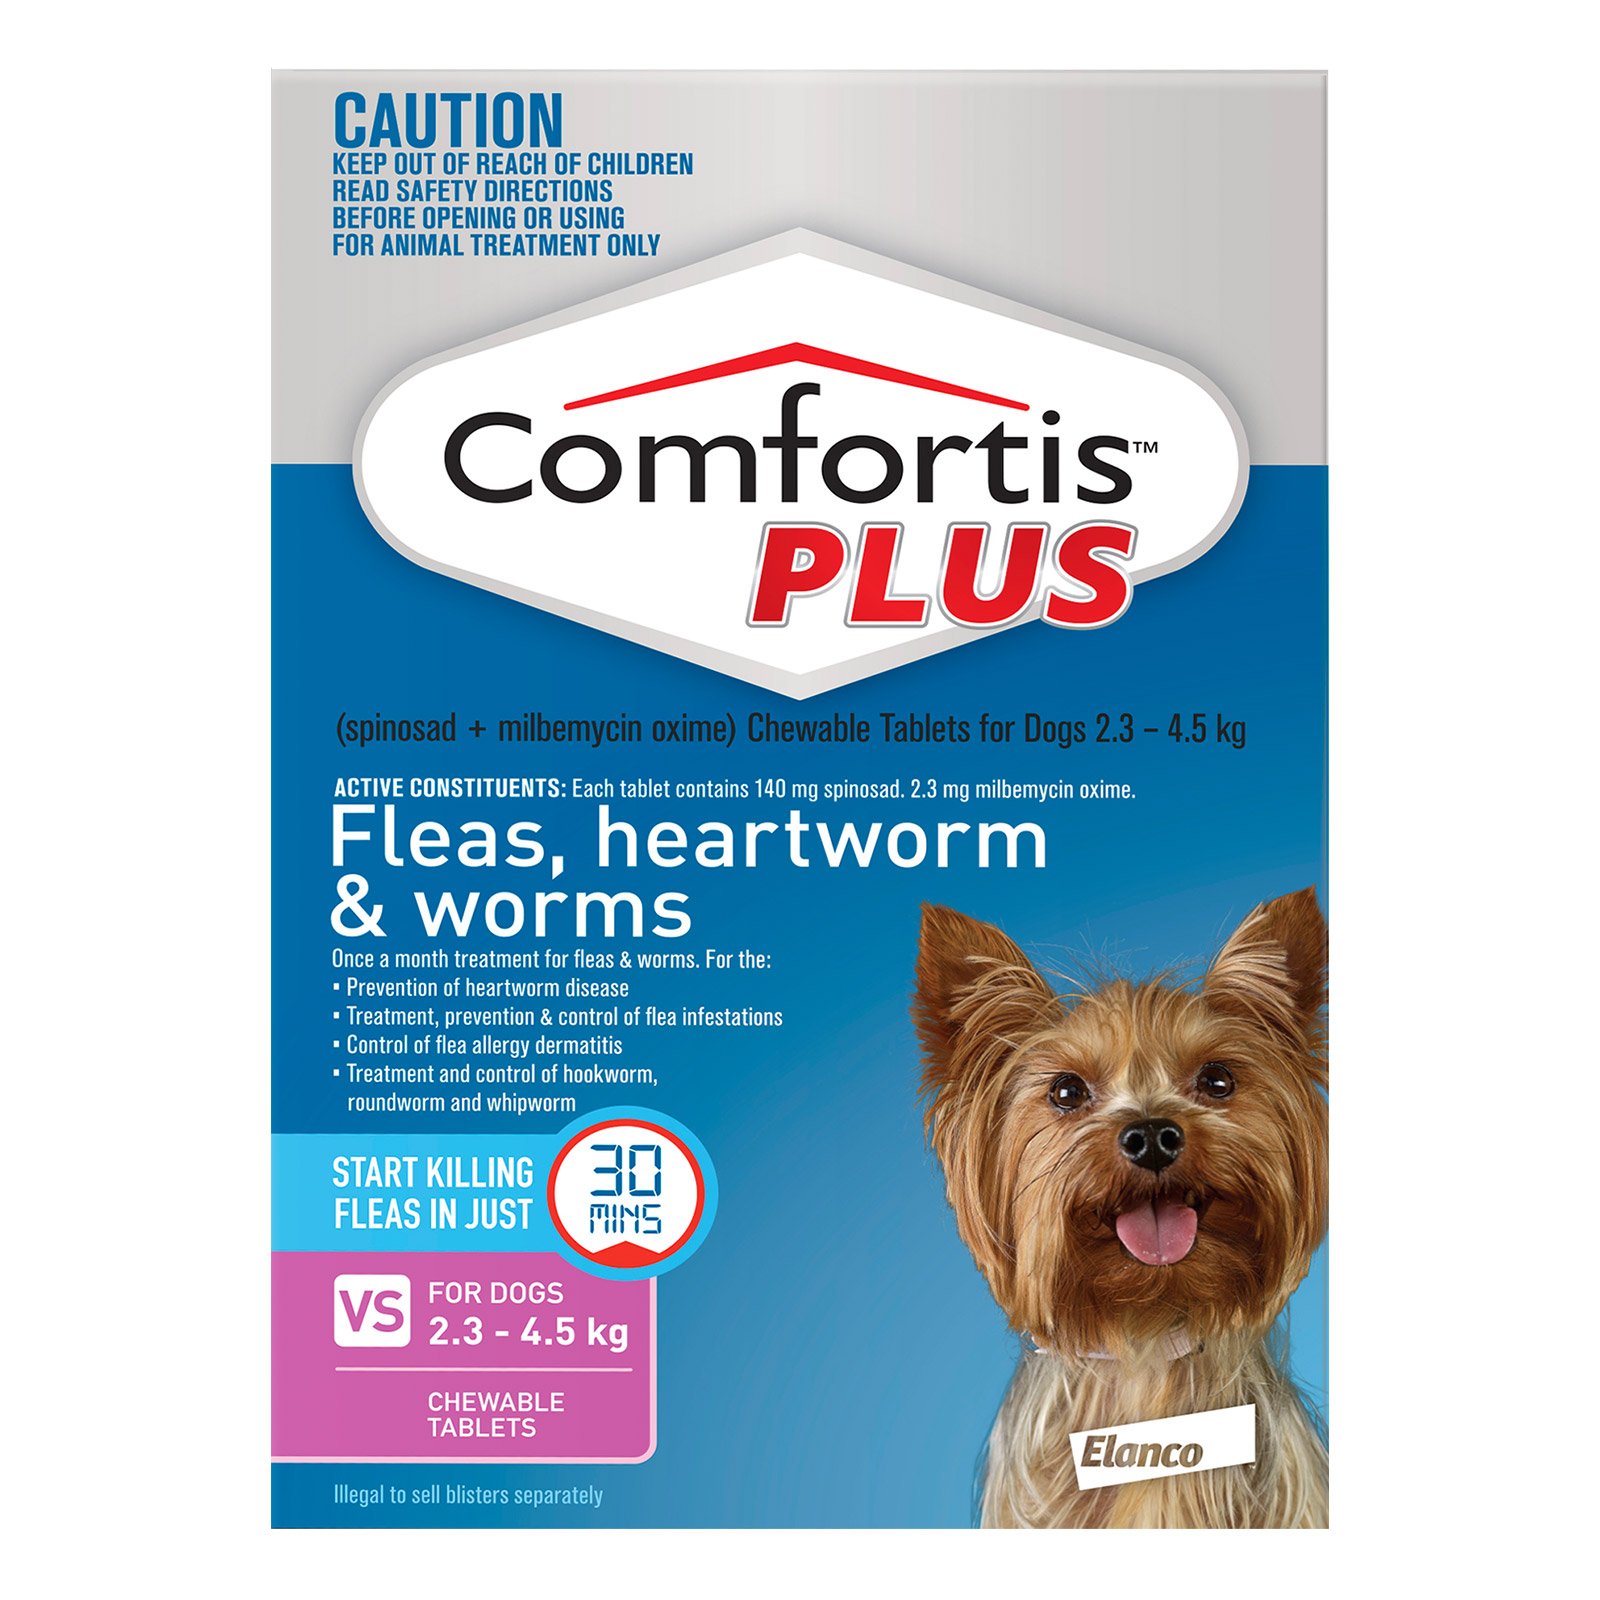 Comfortis Plus (Trifexis) for Dog Supplies